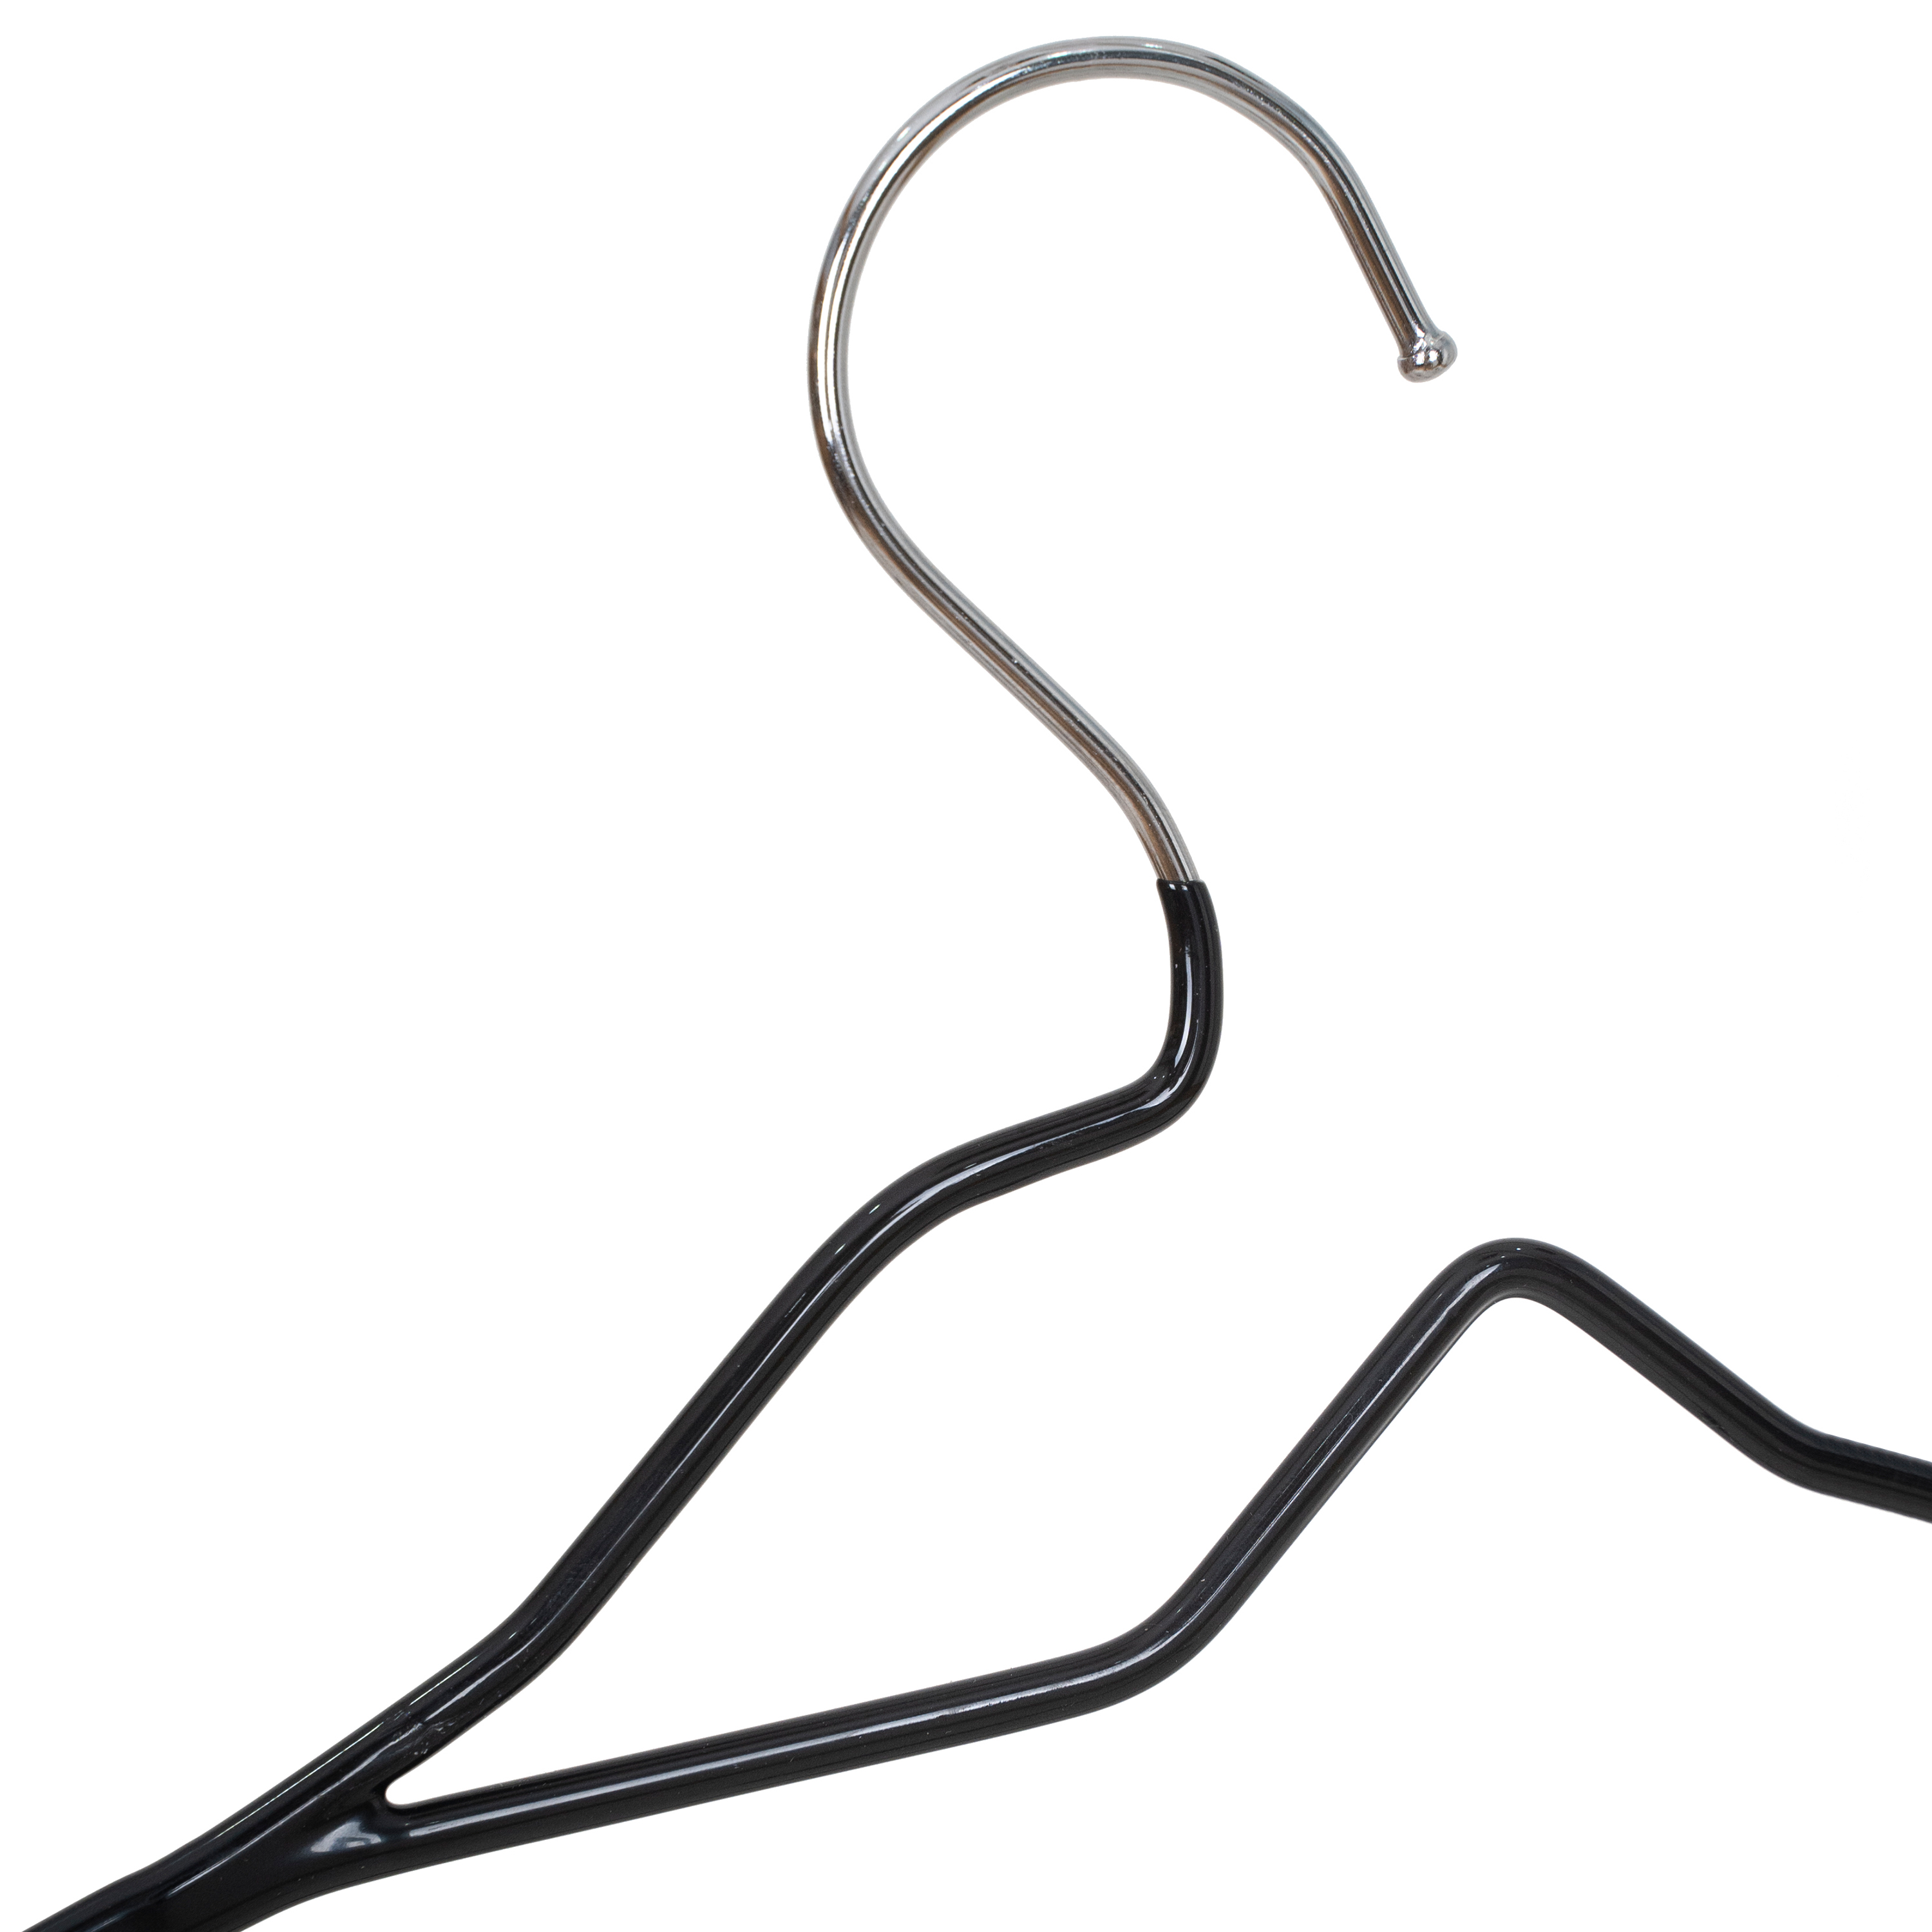 Better Homes & Gardens Non-Slip Clothes Hangers for Adult, 10 Pack, Black, Rubberized Chromef - image 2 of 6